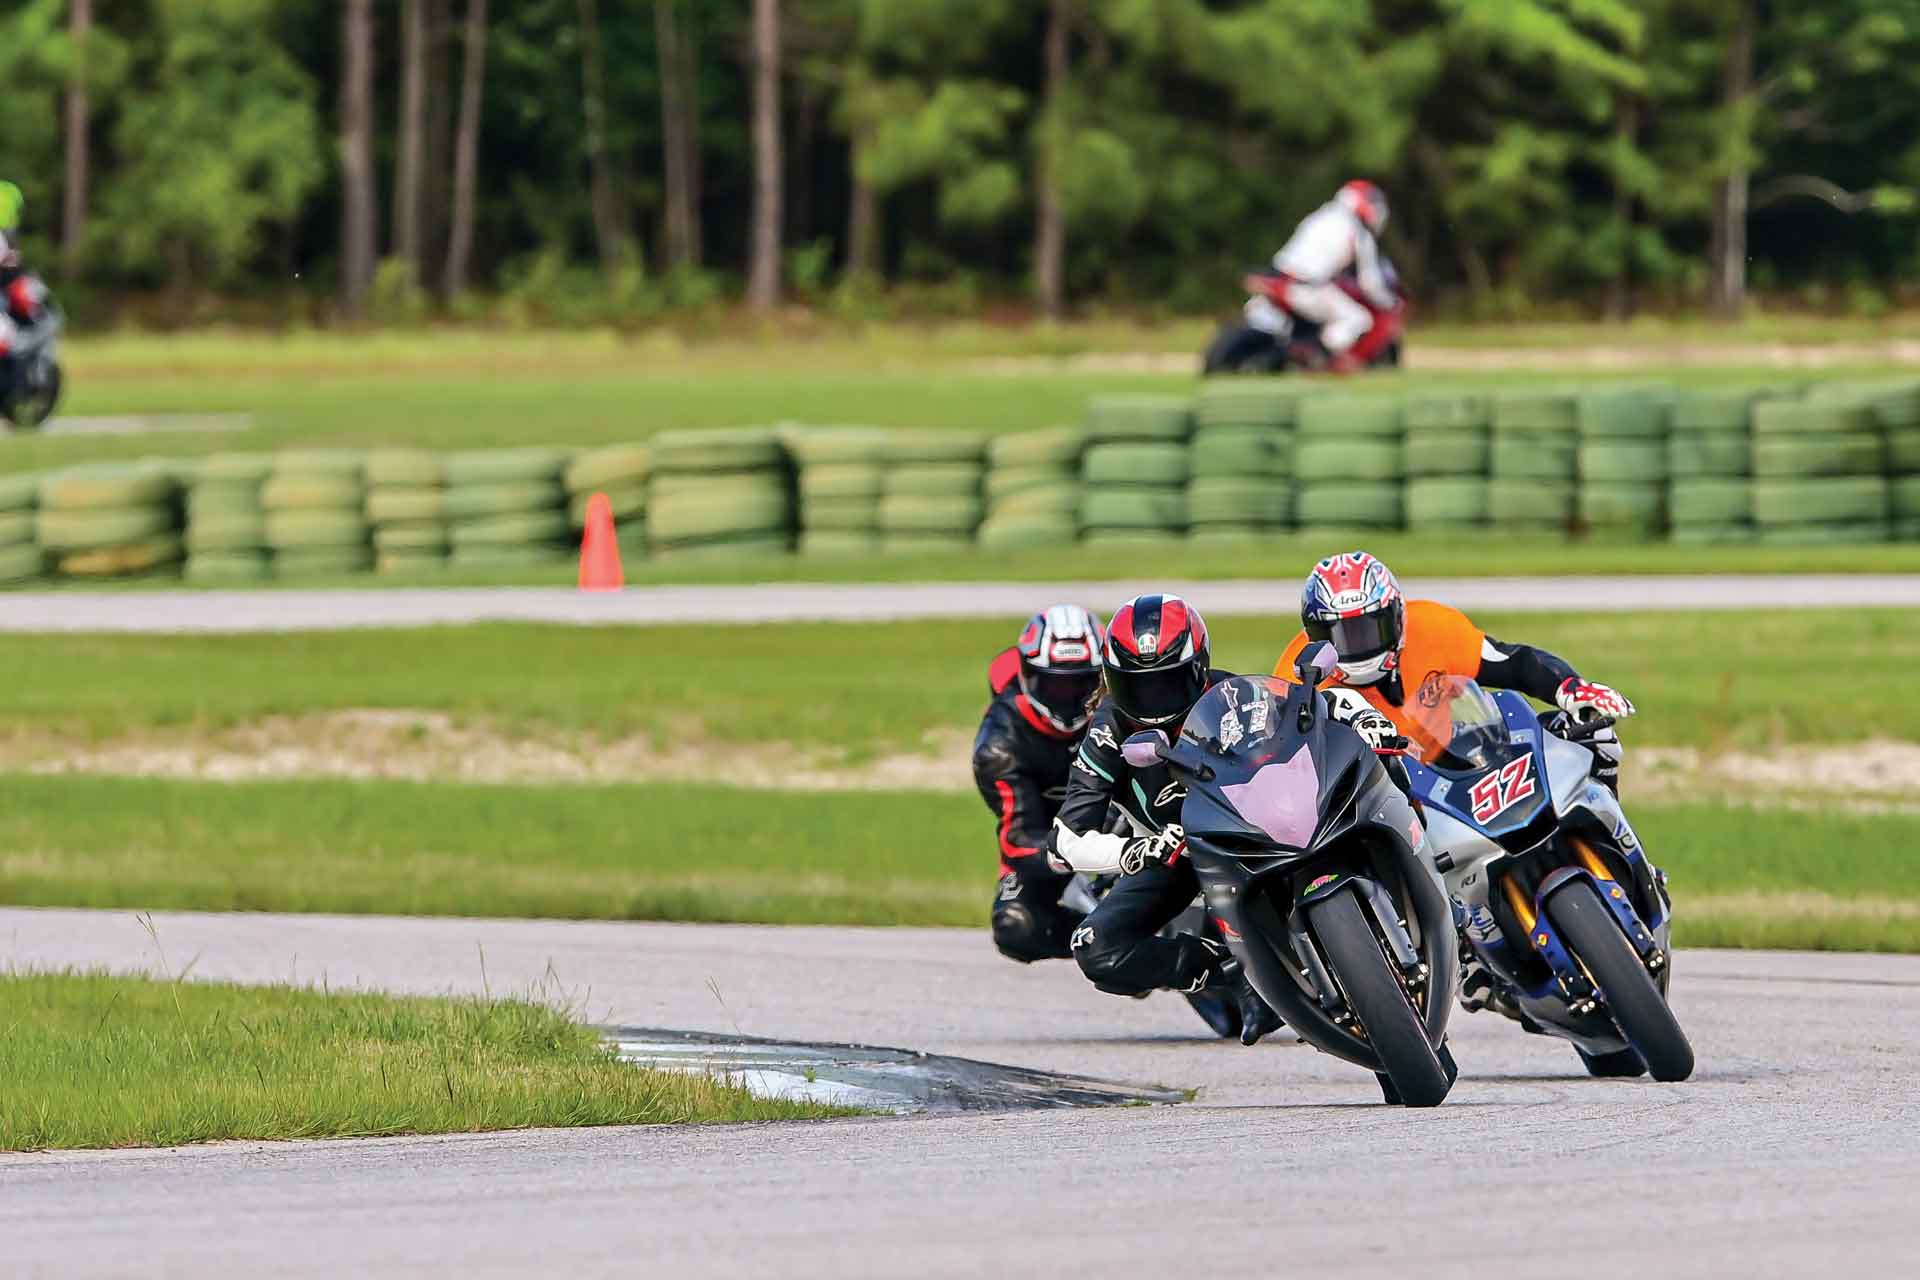 Riders do laps at a track day event